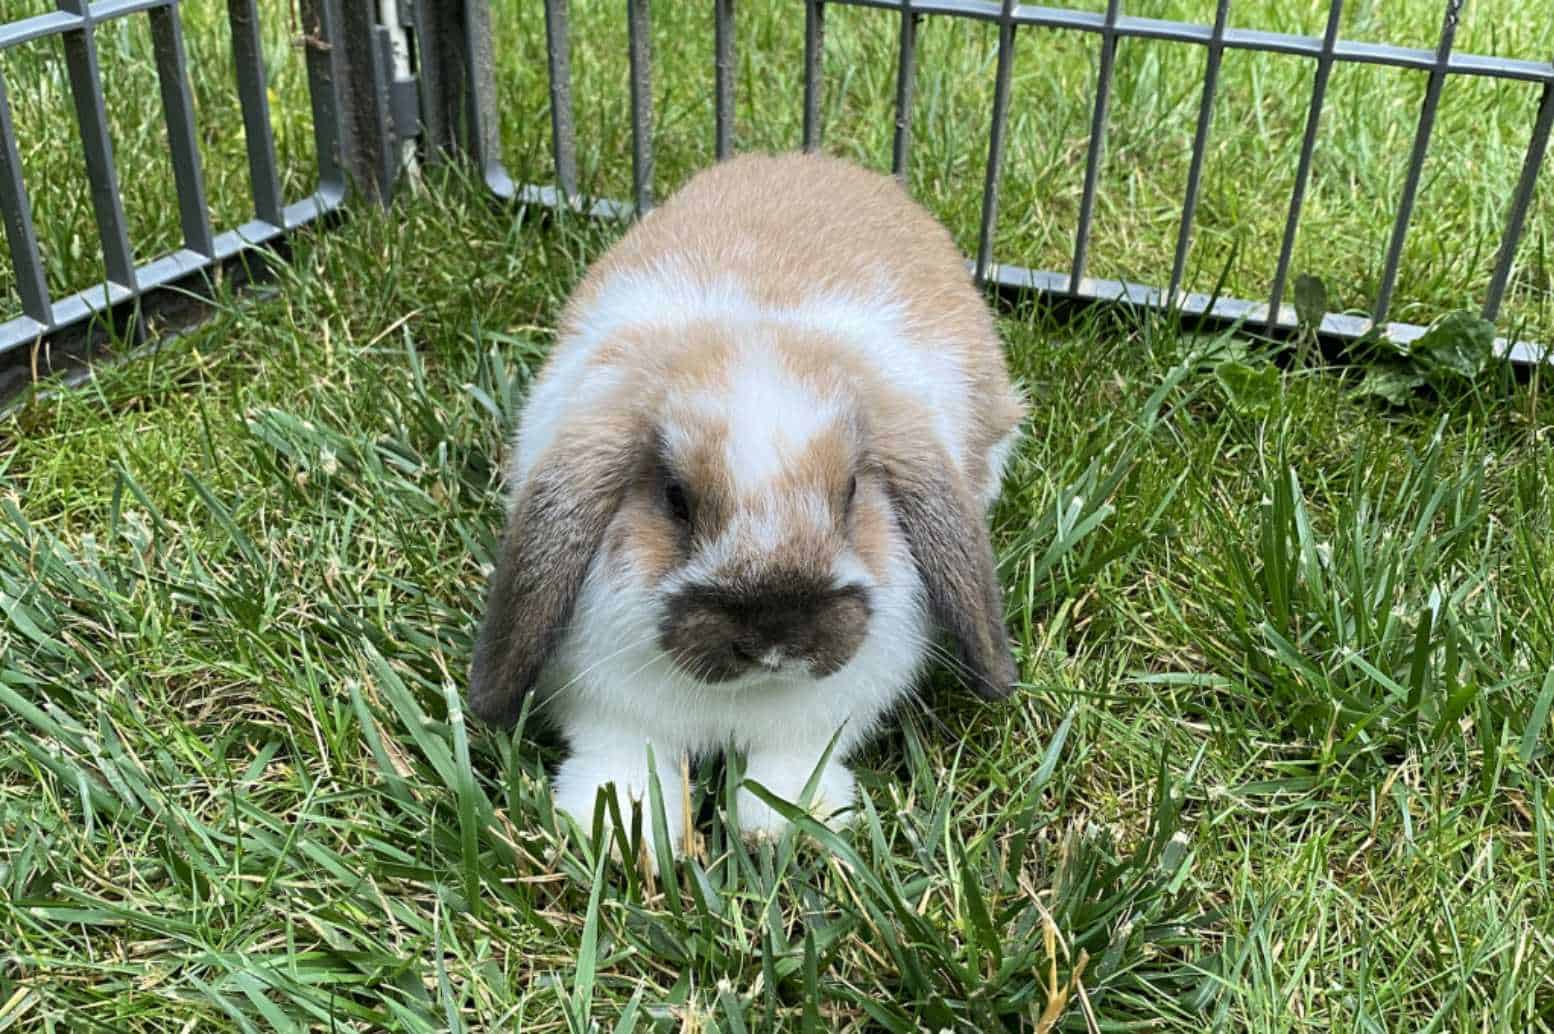 What Are Other Plants Dangerous For Rabbits